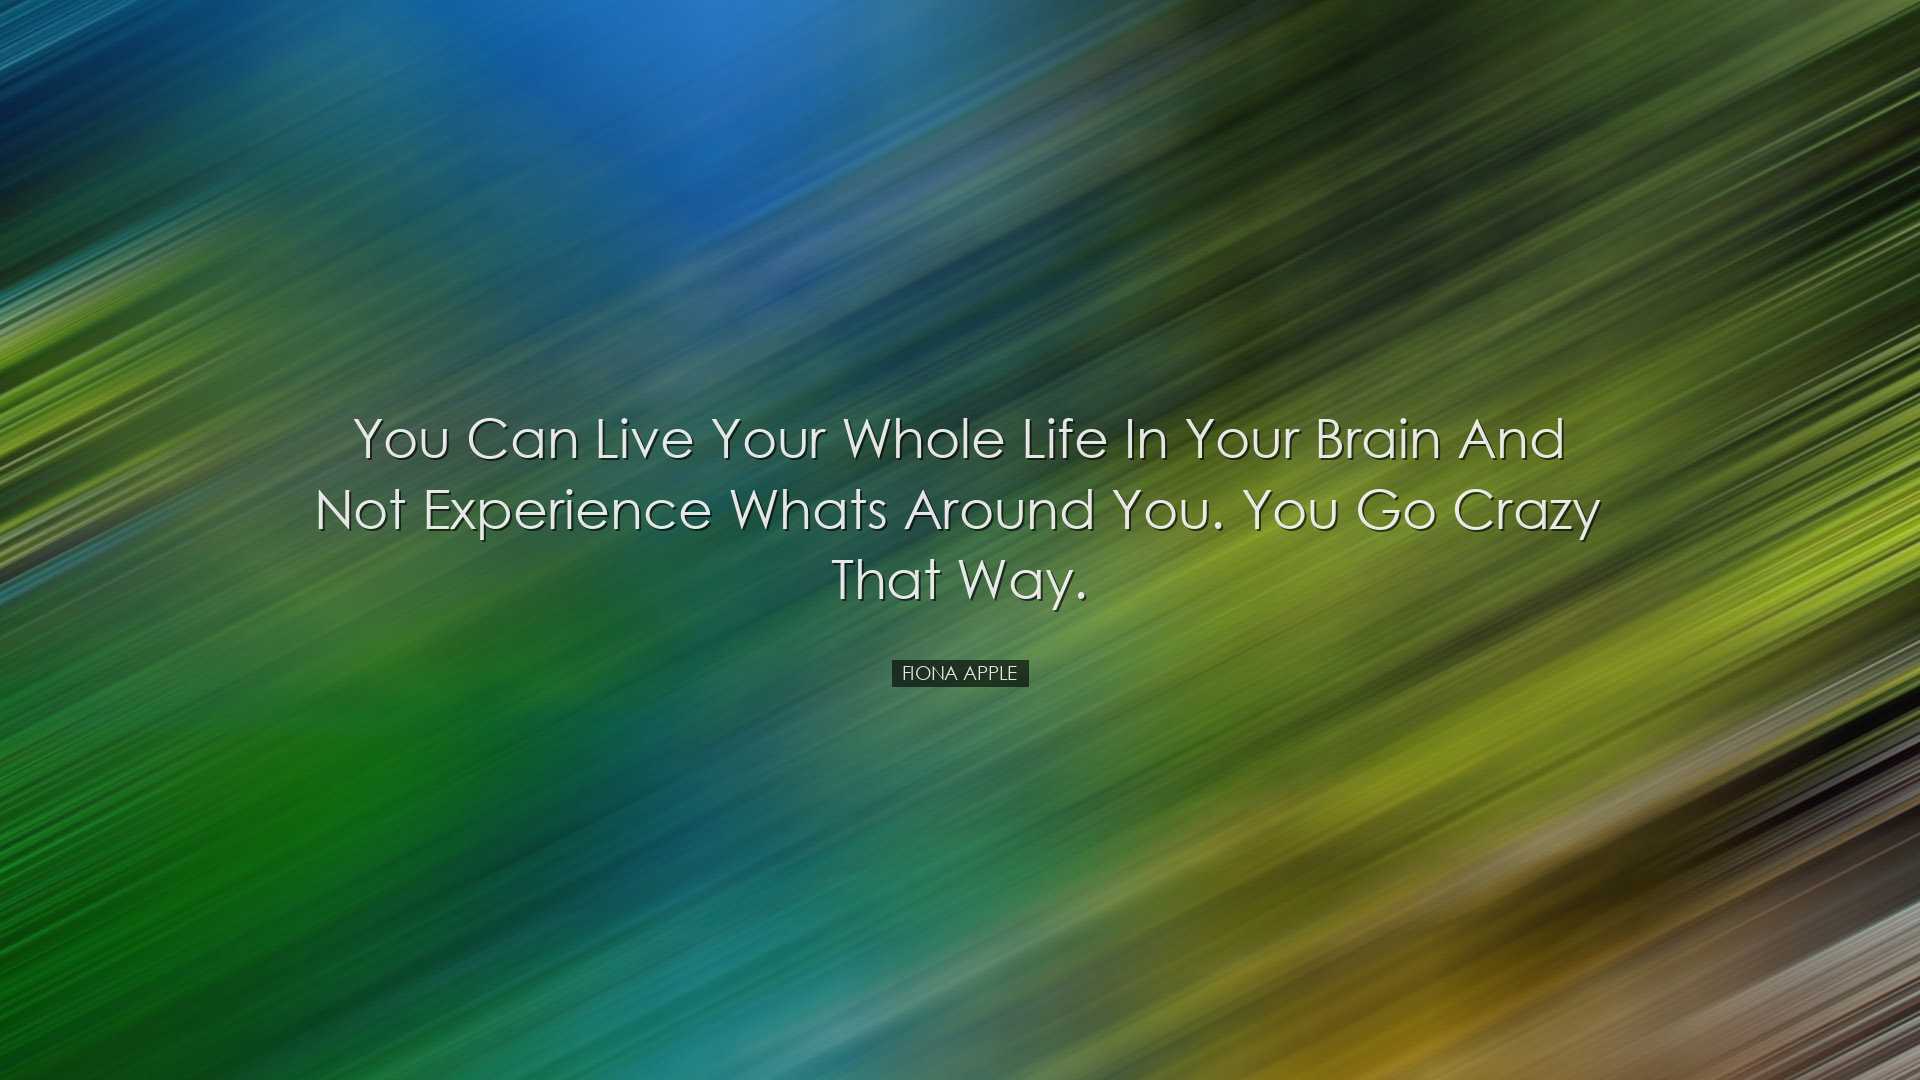 You can live your whole life in your brain and not experience what